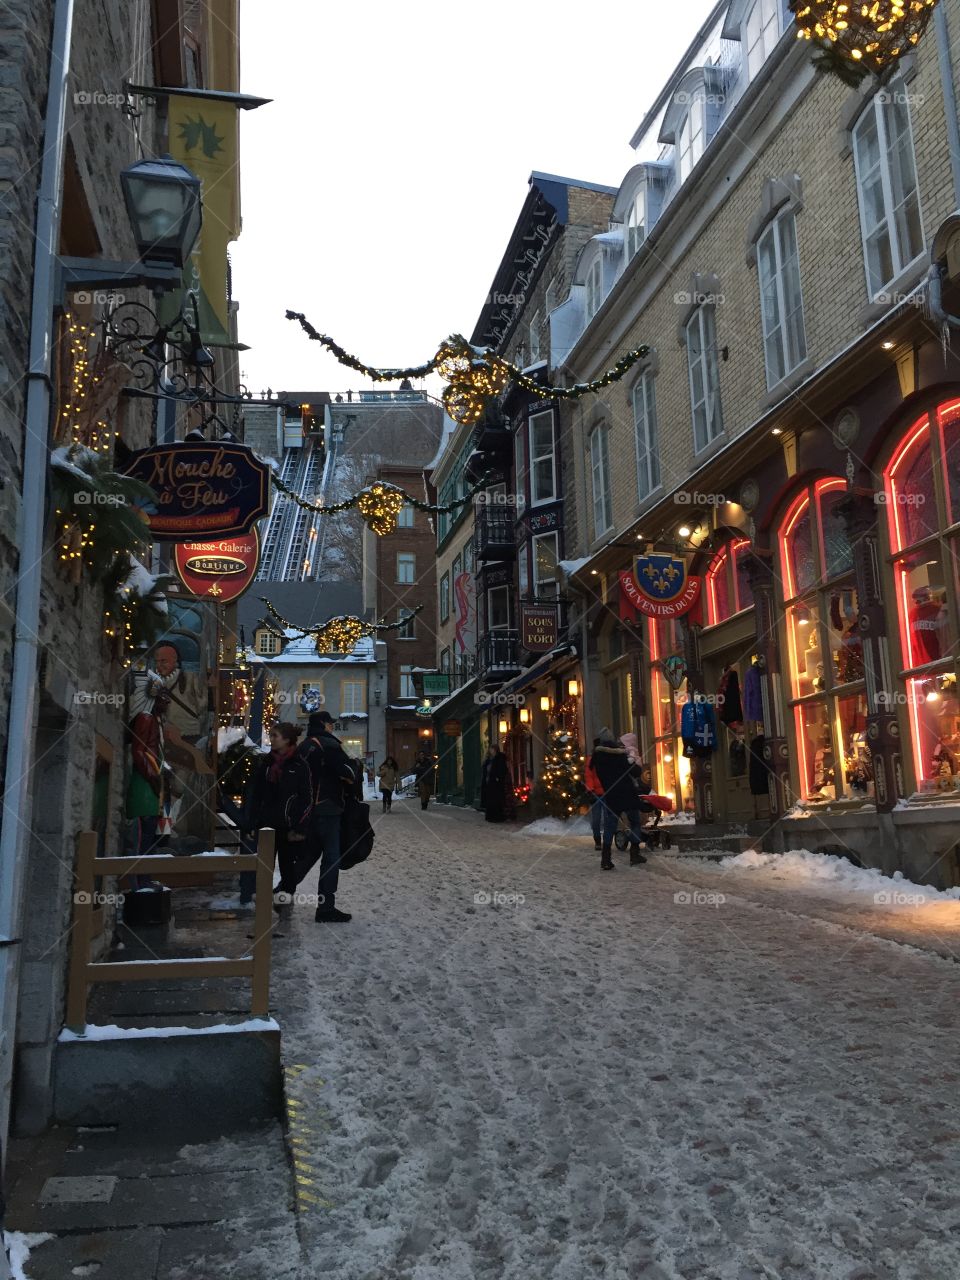 Quebec at Christmas 